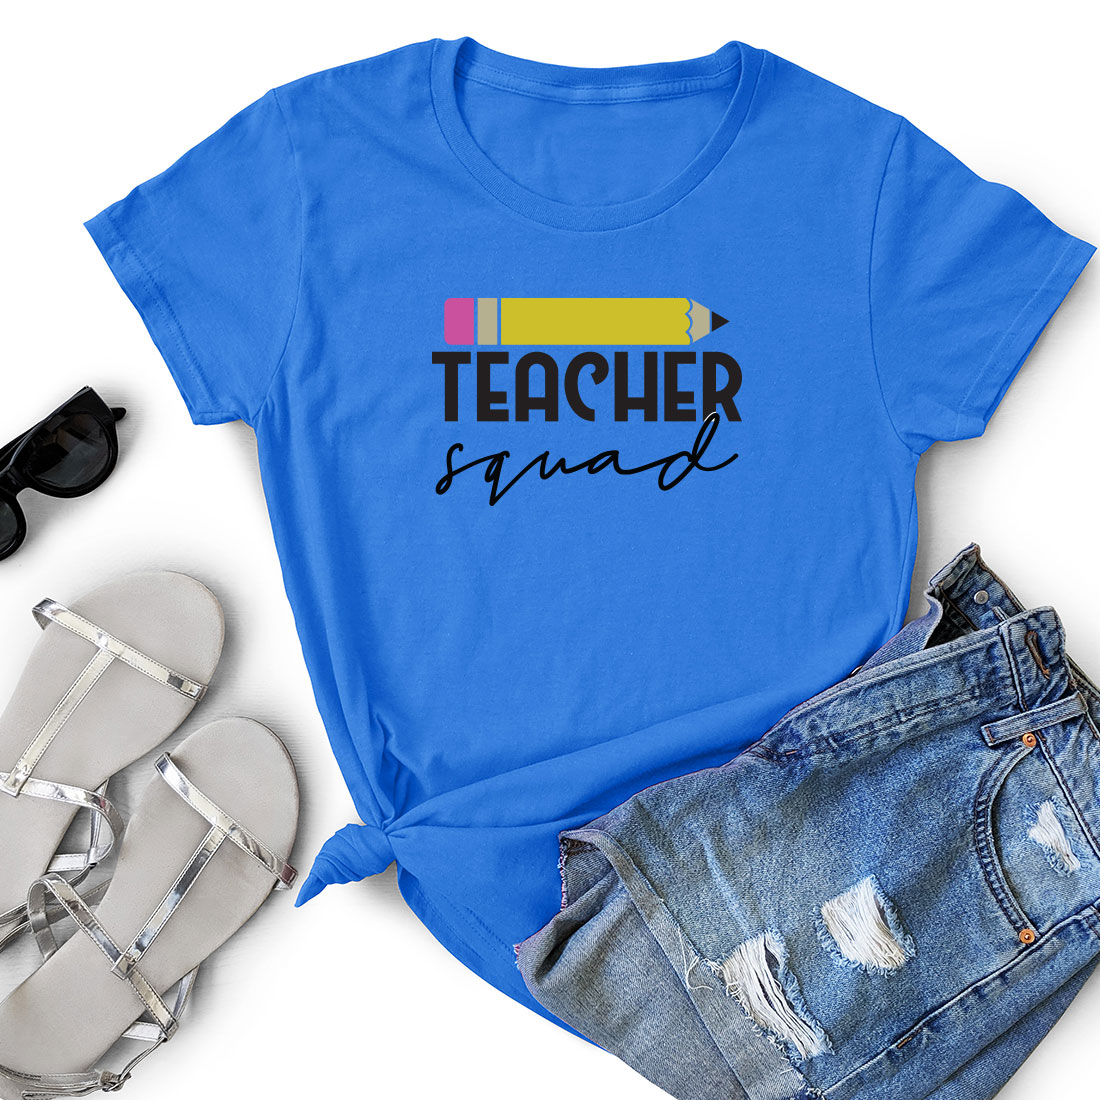 T - shirt that says teacher squad next to a pair of shorts.